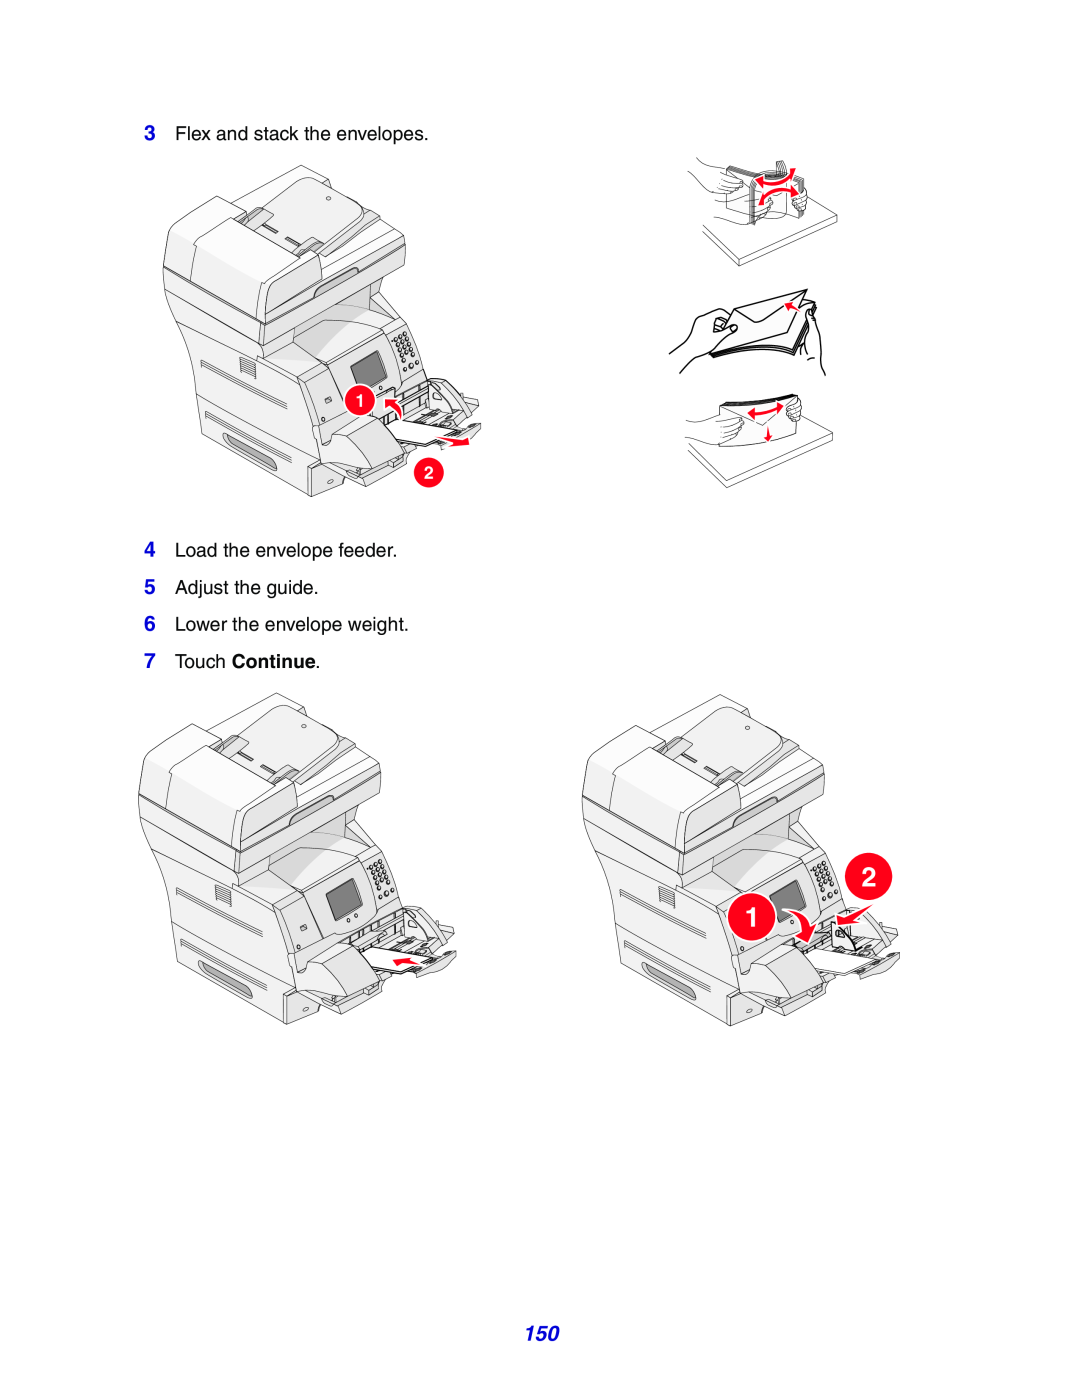 Lexmark X642e manual Touch Continue, Flex and stack the envelopes, Load the envelope feeder 5 Adjust the guide 